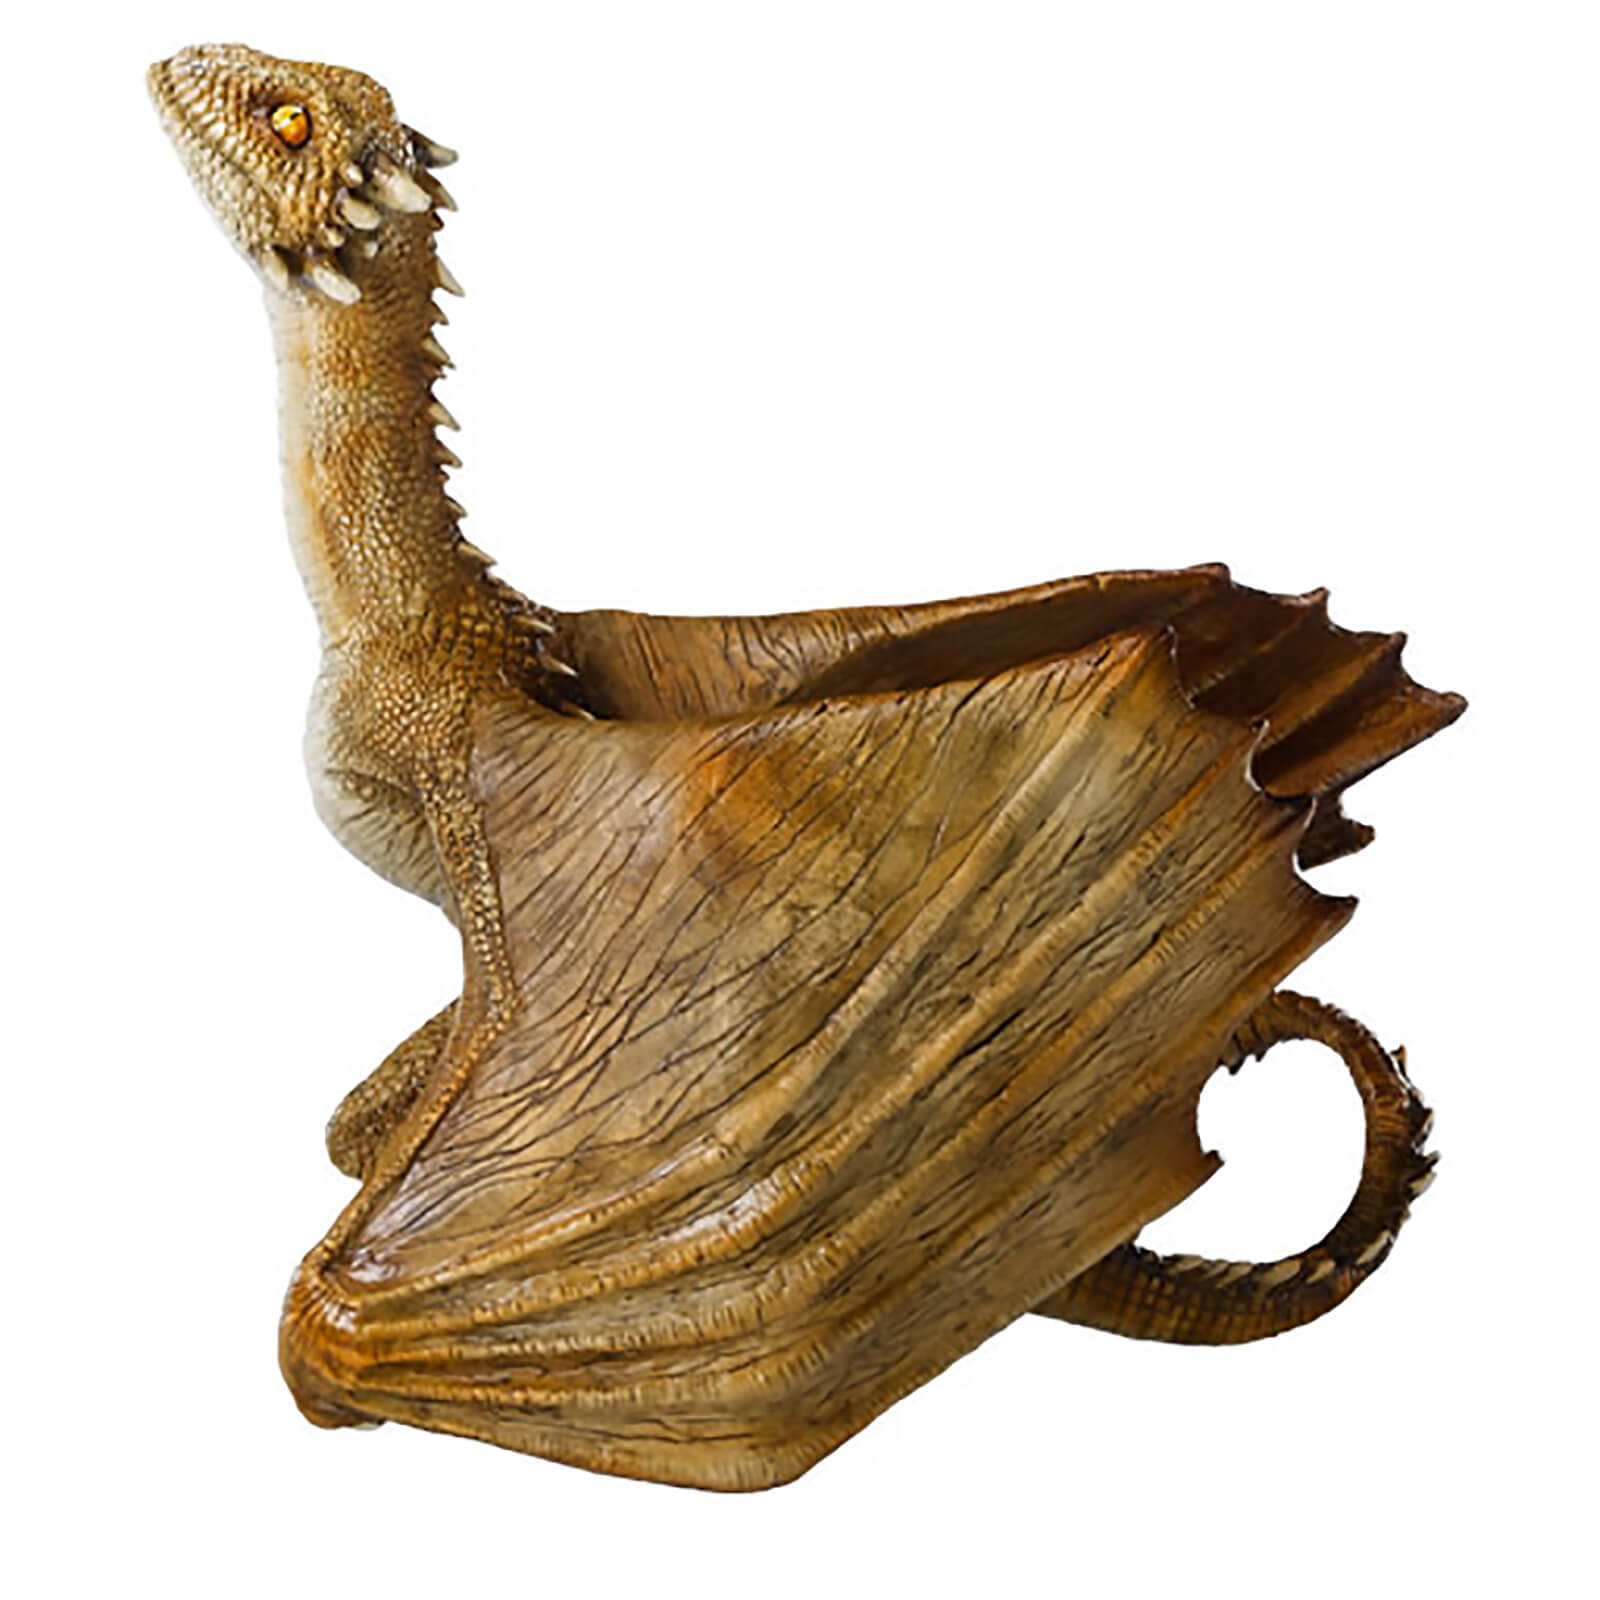 Noble Collection Game of Thrones Viserion Baby Dragon Sculpture